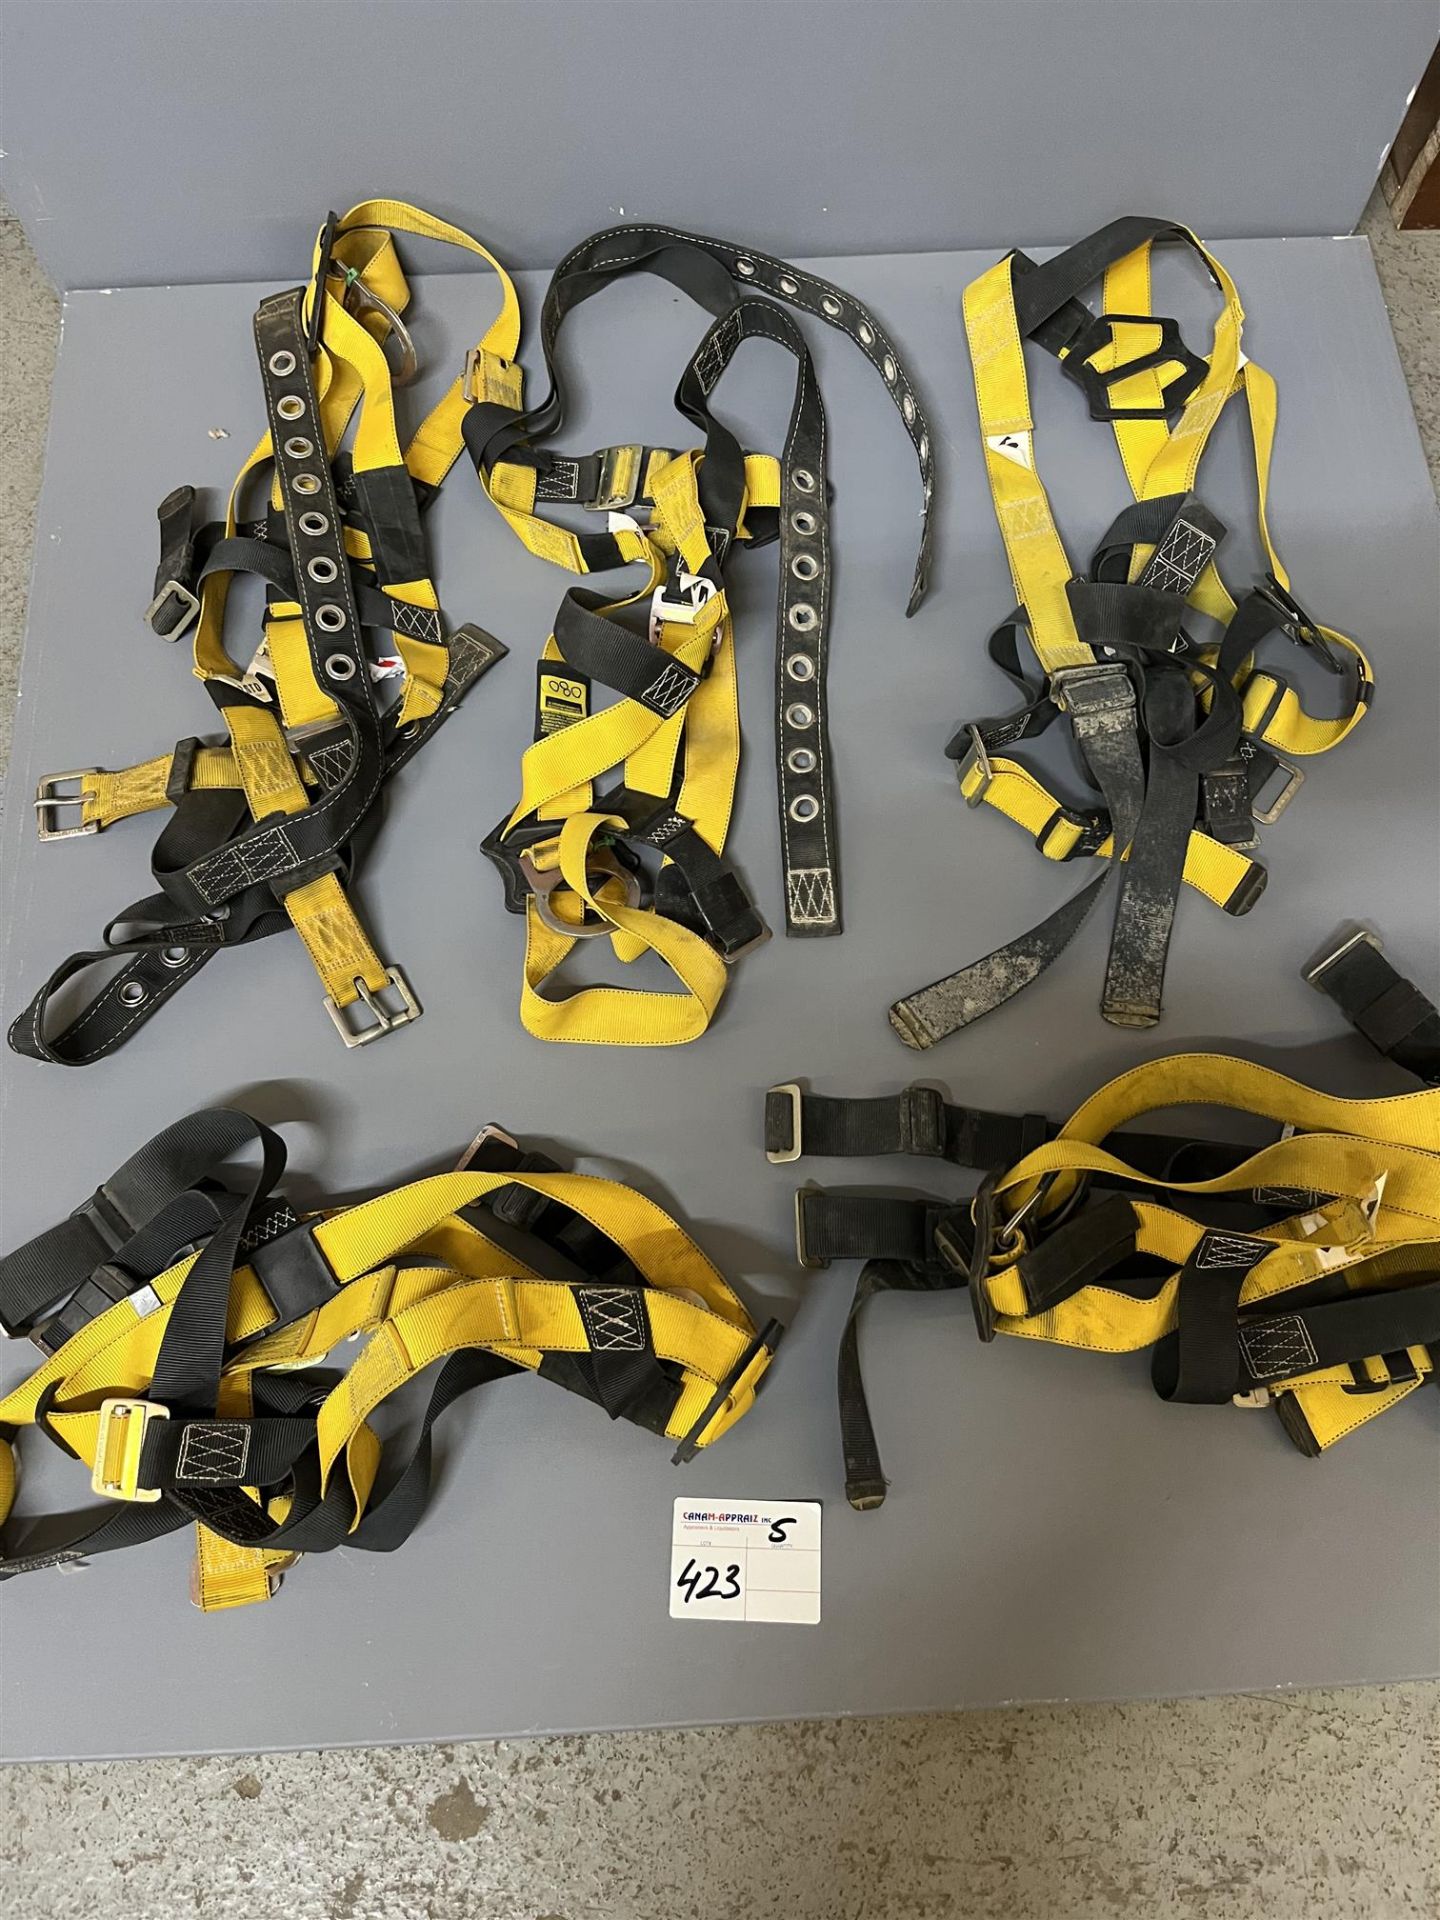 Assorted Kosto Safety Harness - 5 Pieces